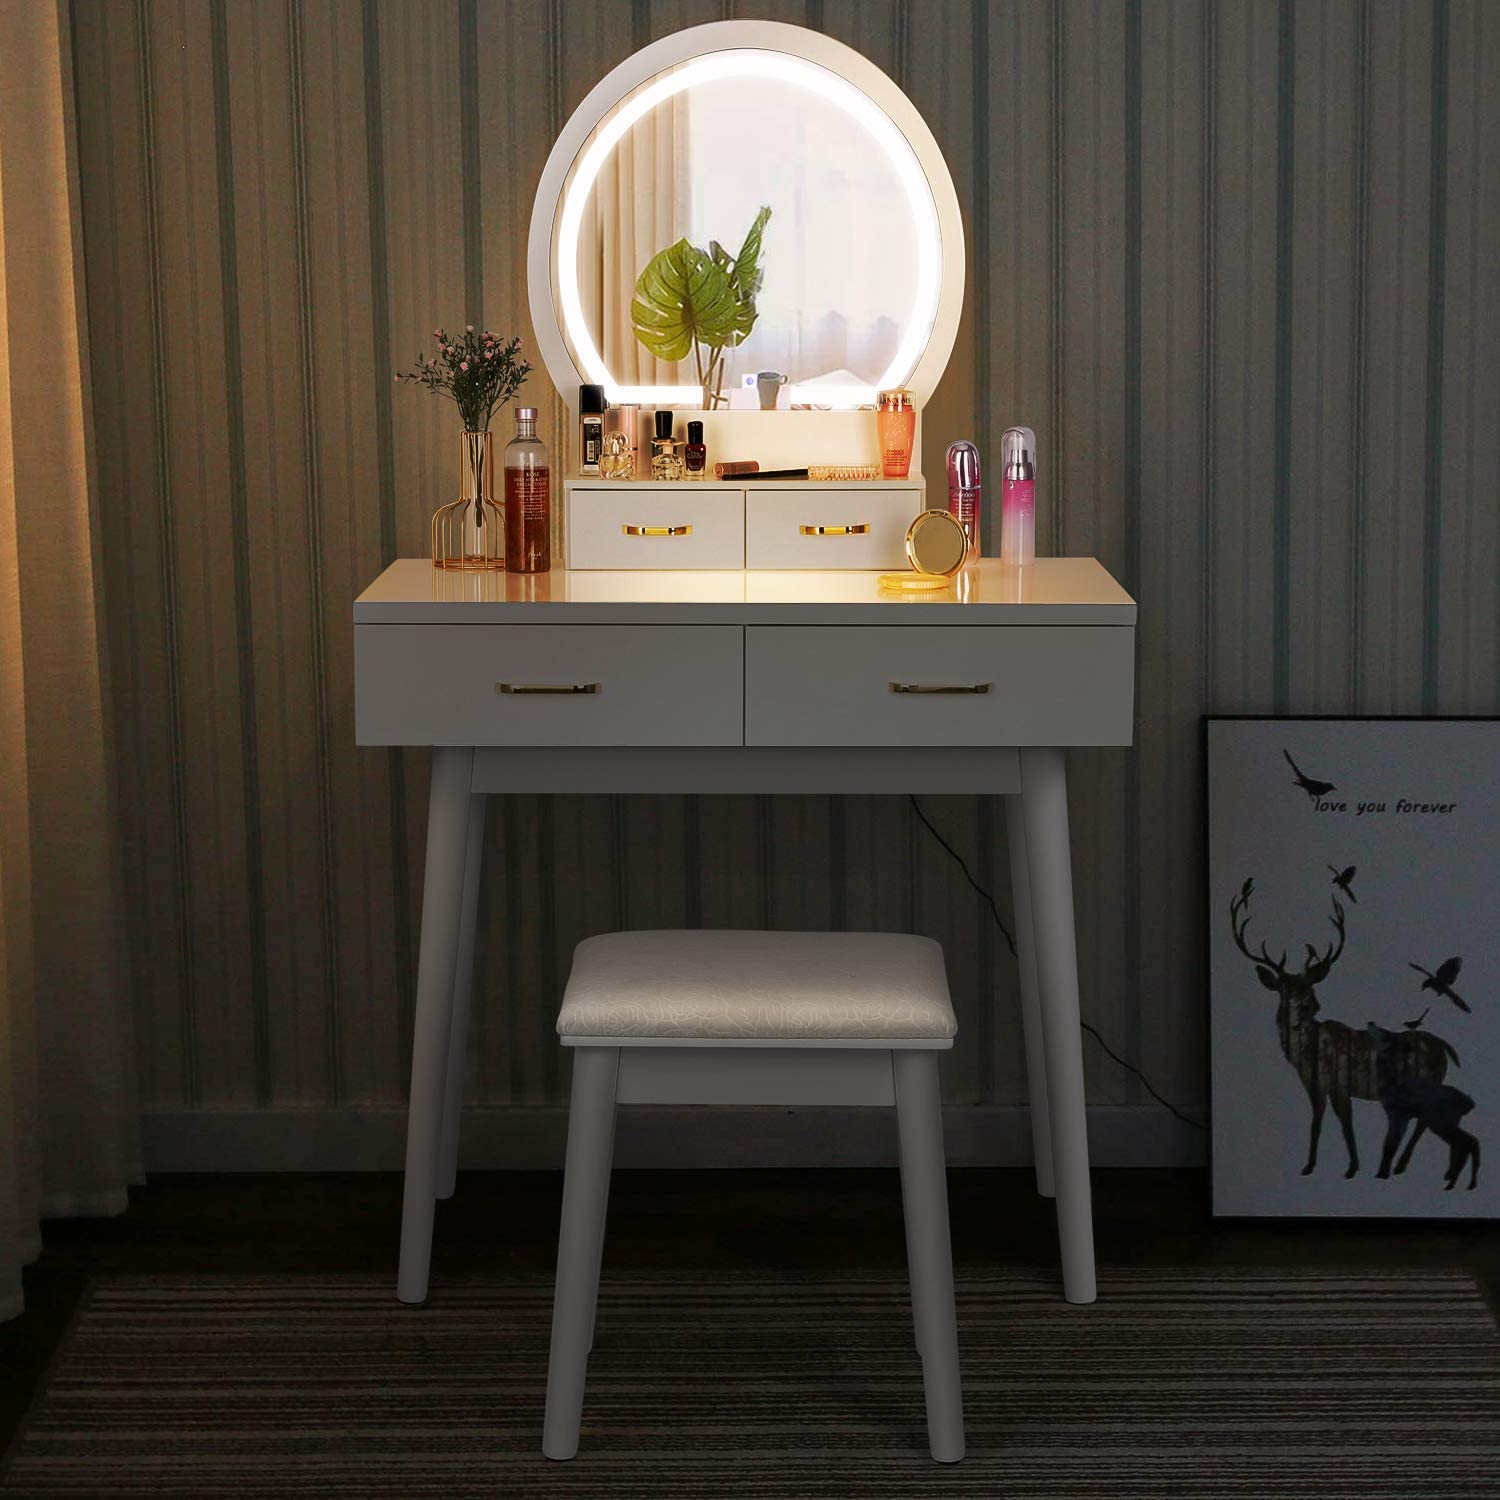 Dressing Table: White Vanity Desk with Lighted Mirror